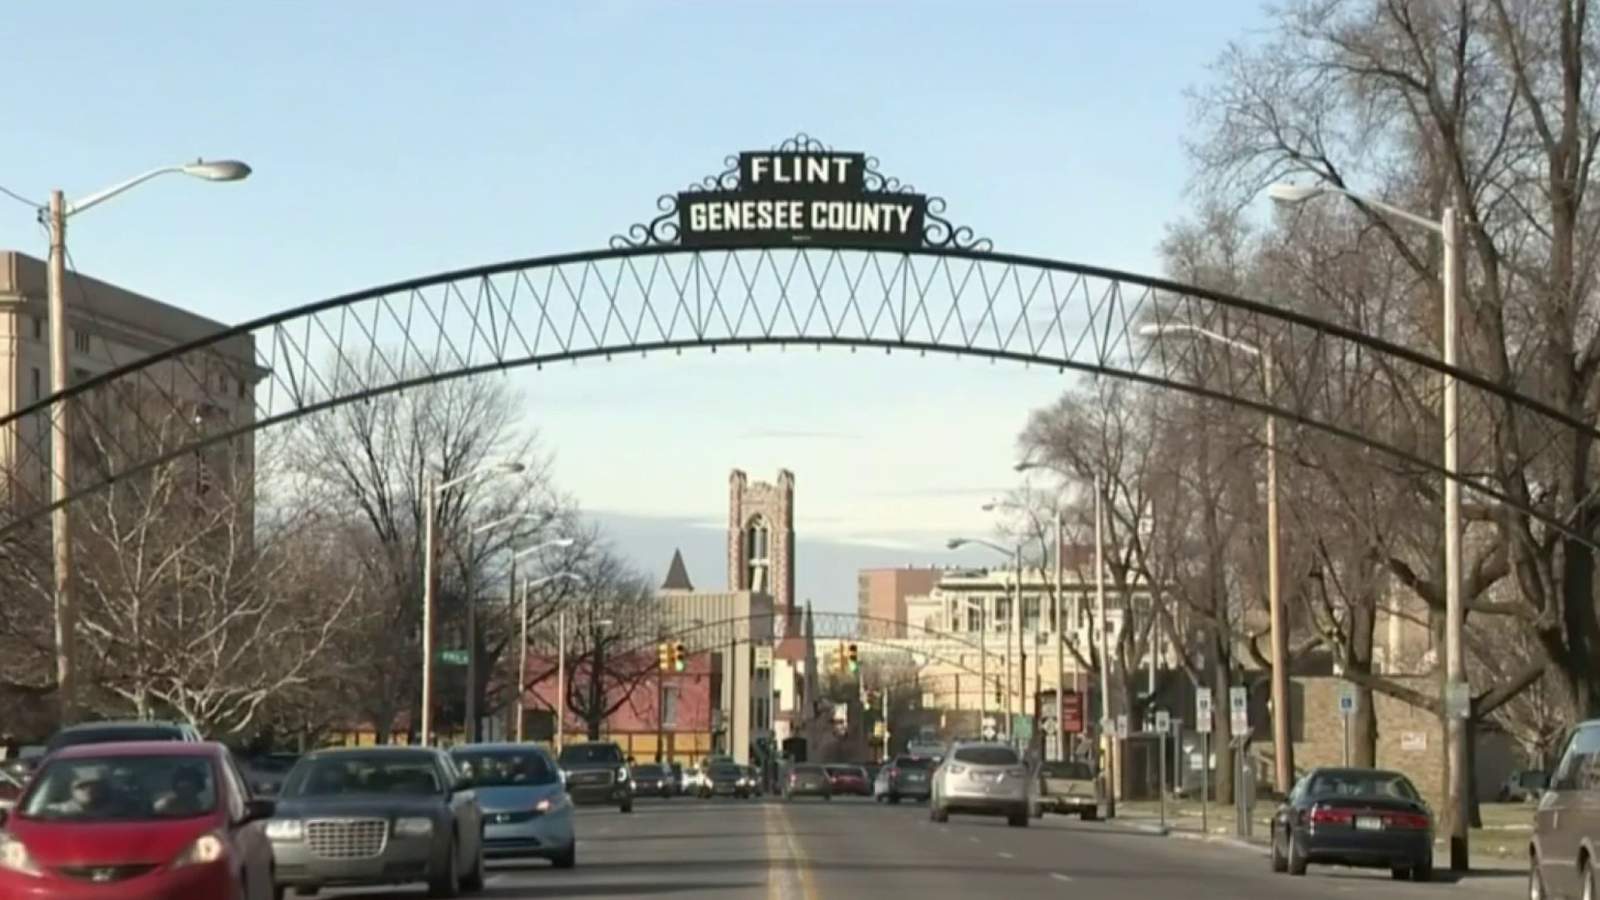 Defense attorney calls for judge to be removed in Flint water crisis case